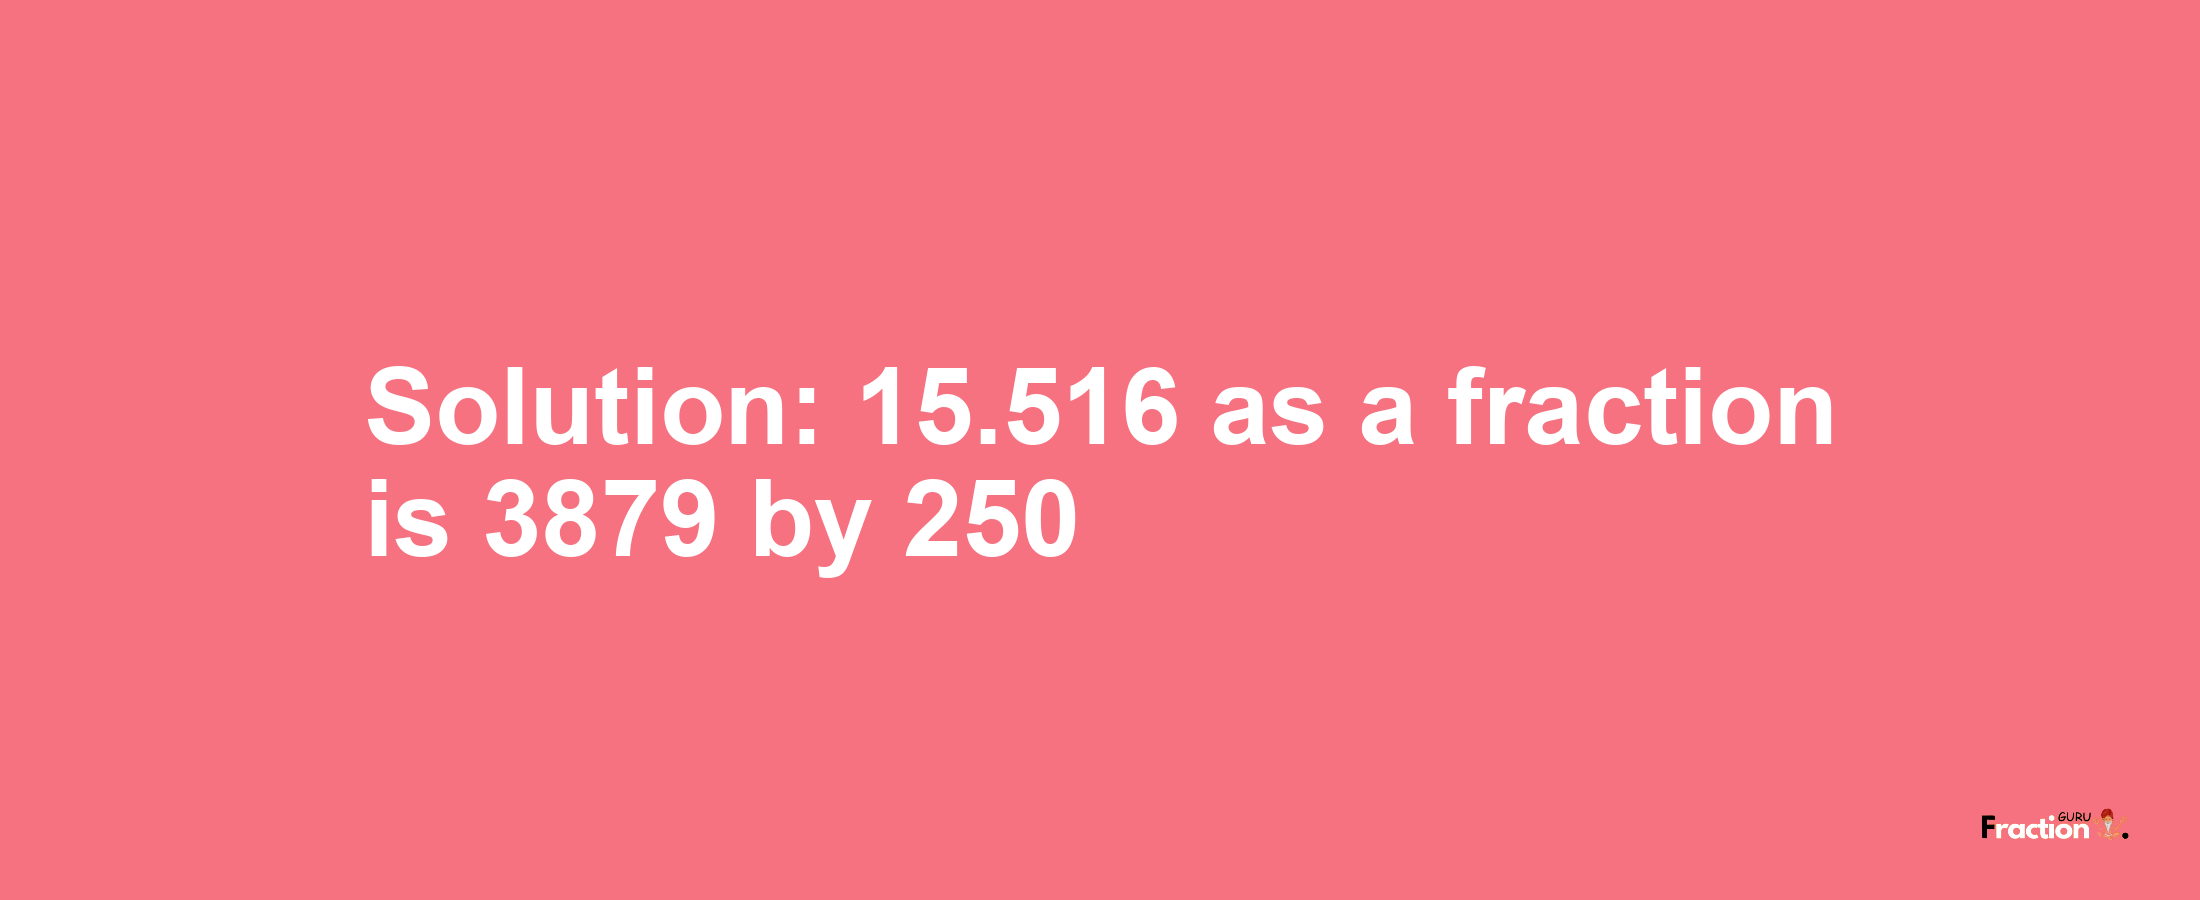 Solution:15.516 as a fraction is 3879/250